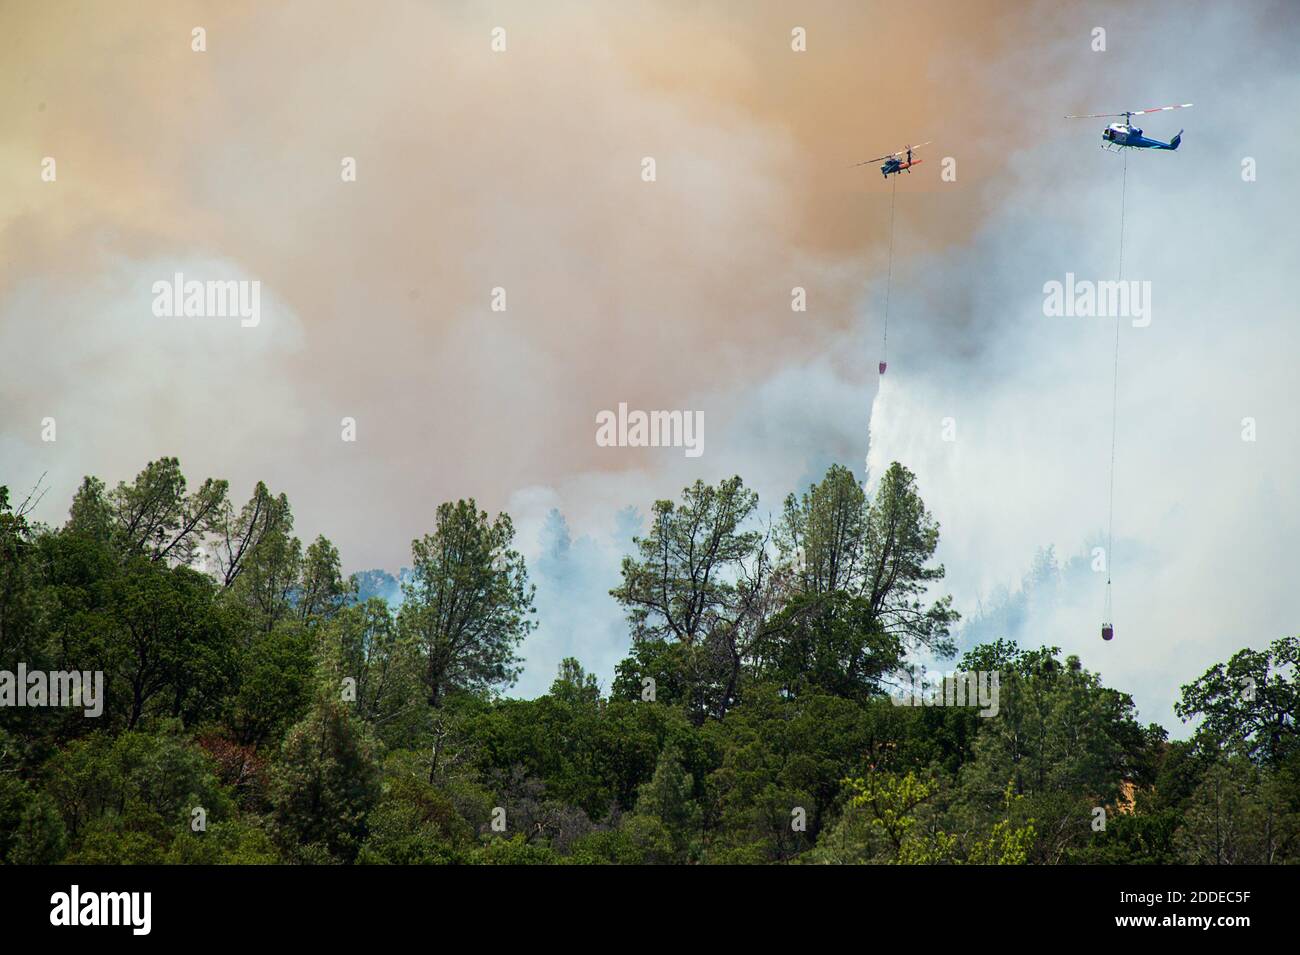 NO FILM, NO VIDEO, NO TV, NO DOCUMENTARY - Helicopters drop water, attacking the County Fire, which has burned more than 22,000 acres without containment, on Sunday, July 1, 2018 in Capay Valley, CA, USA. Photo by Paul Kitagaki Jr./Sacramento Bee/TNS/ABACAPRESS.COM Stock Photo